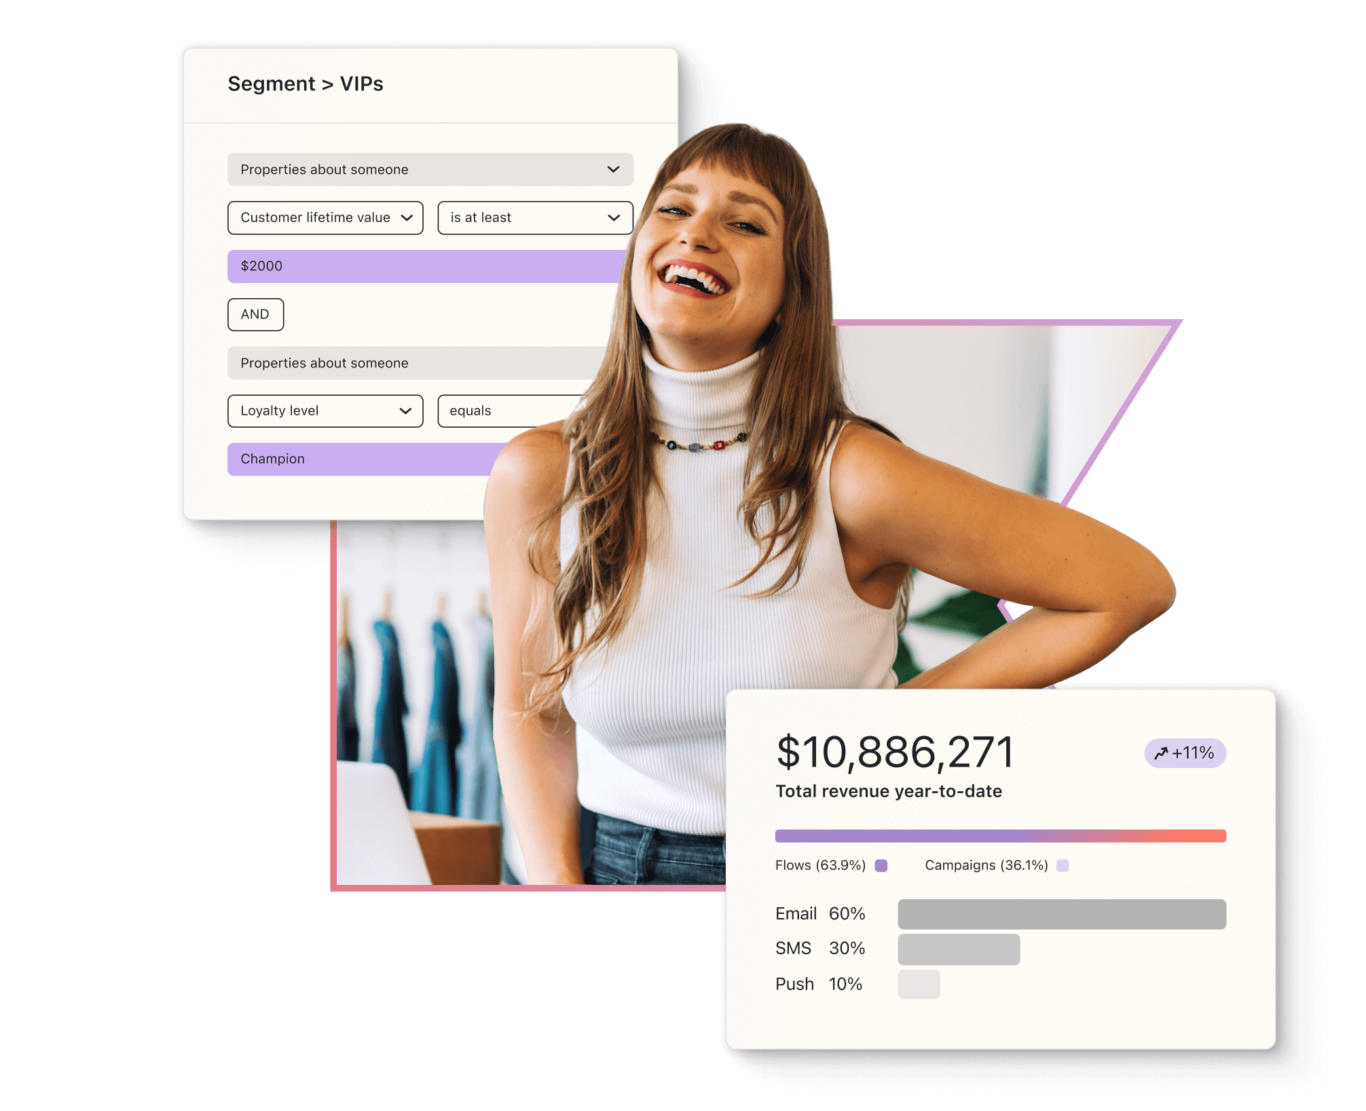 Woman in white sleeveless turtleneck smiling with hand on hip between a platform snippet showing segmentation for VIP customers and a snippet of the platform showing total revenue to date and the breakdown of that revenue by flows, campaigns, email, SMS, and push